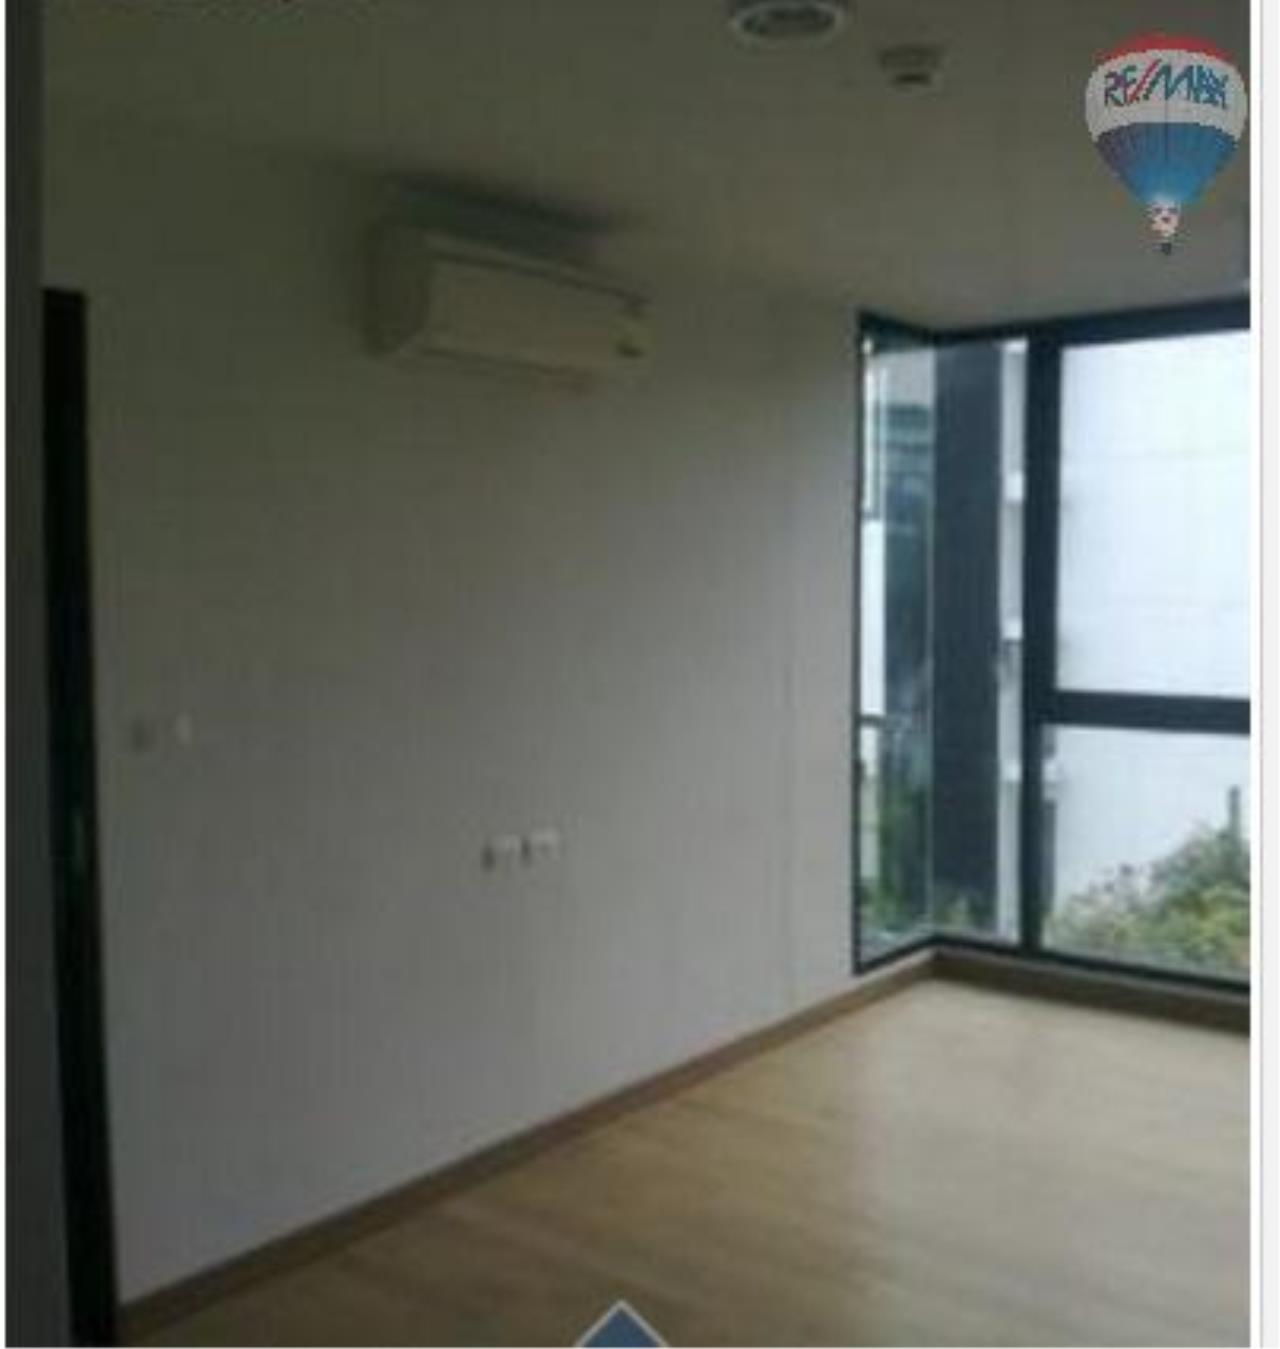 RE/MAX Properties Agency's 1 Bedroom 43.09 Sq.M.for sale 4.7 M.THB  2